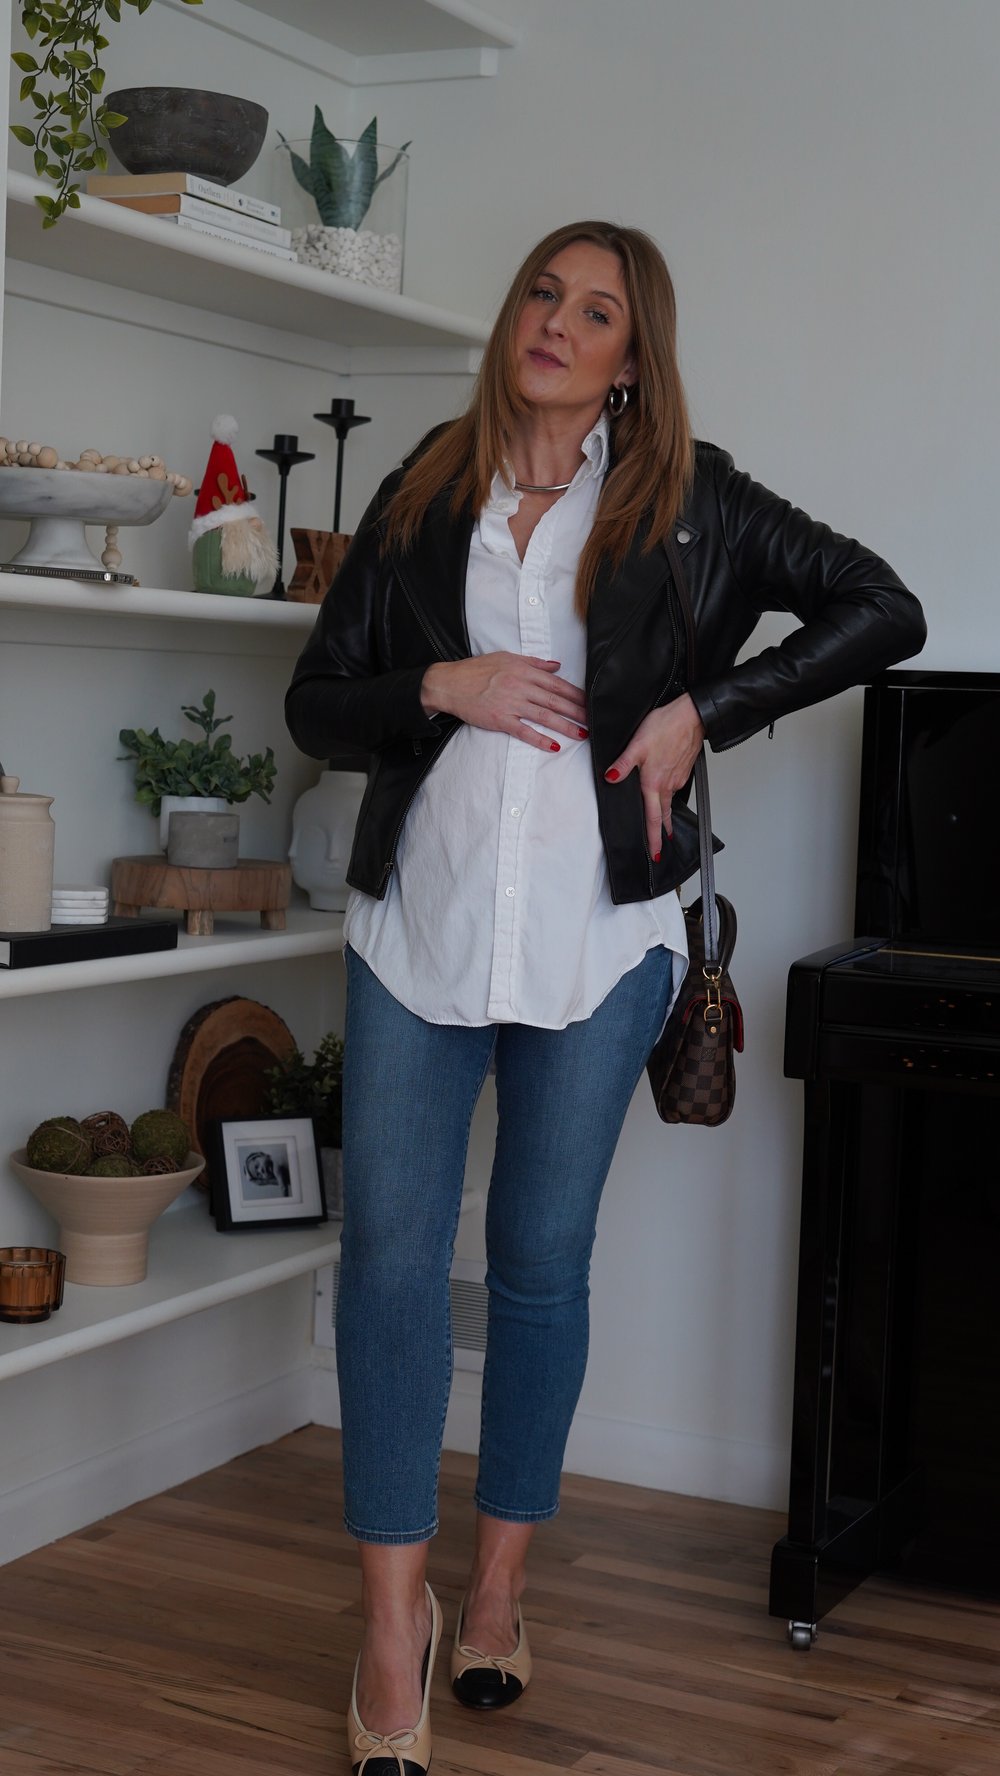  Jessica Ashley wears The Jacket Maker Flashback leather jacket in size XS with JBrand maternity denim,  Chanel logo flats, white blouse and Gucci Dionysus small cross body bag | best leather jackets for women 